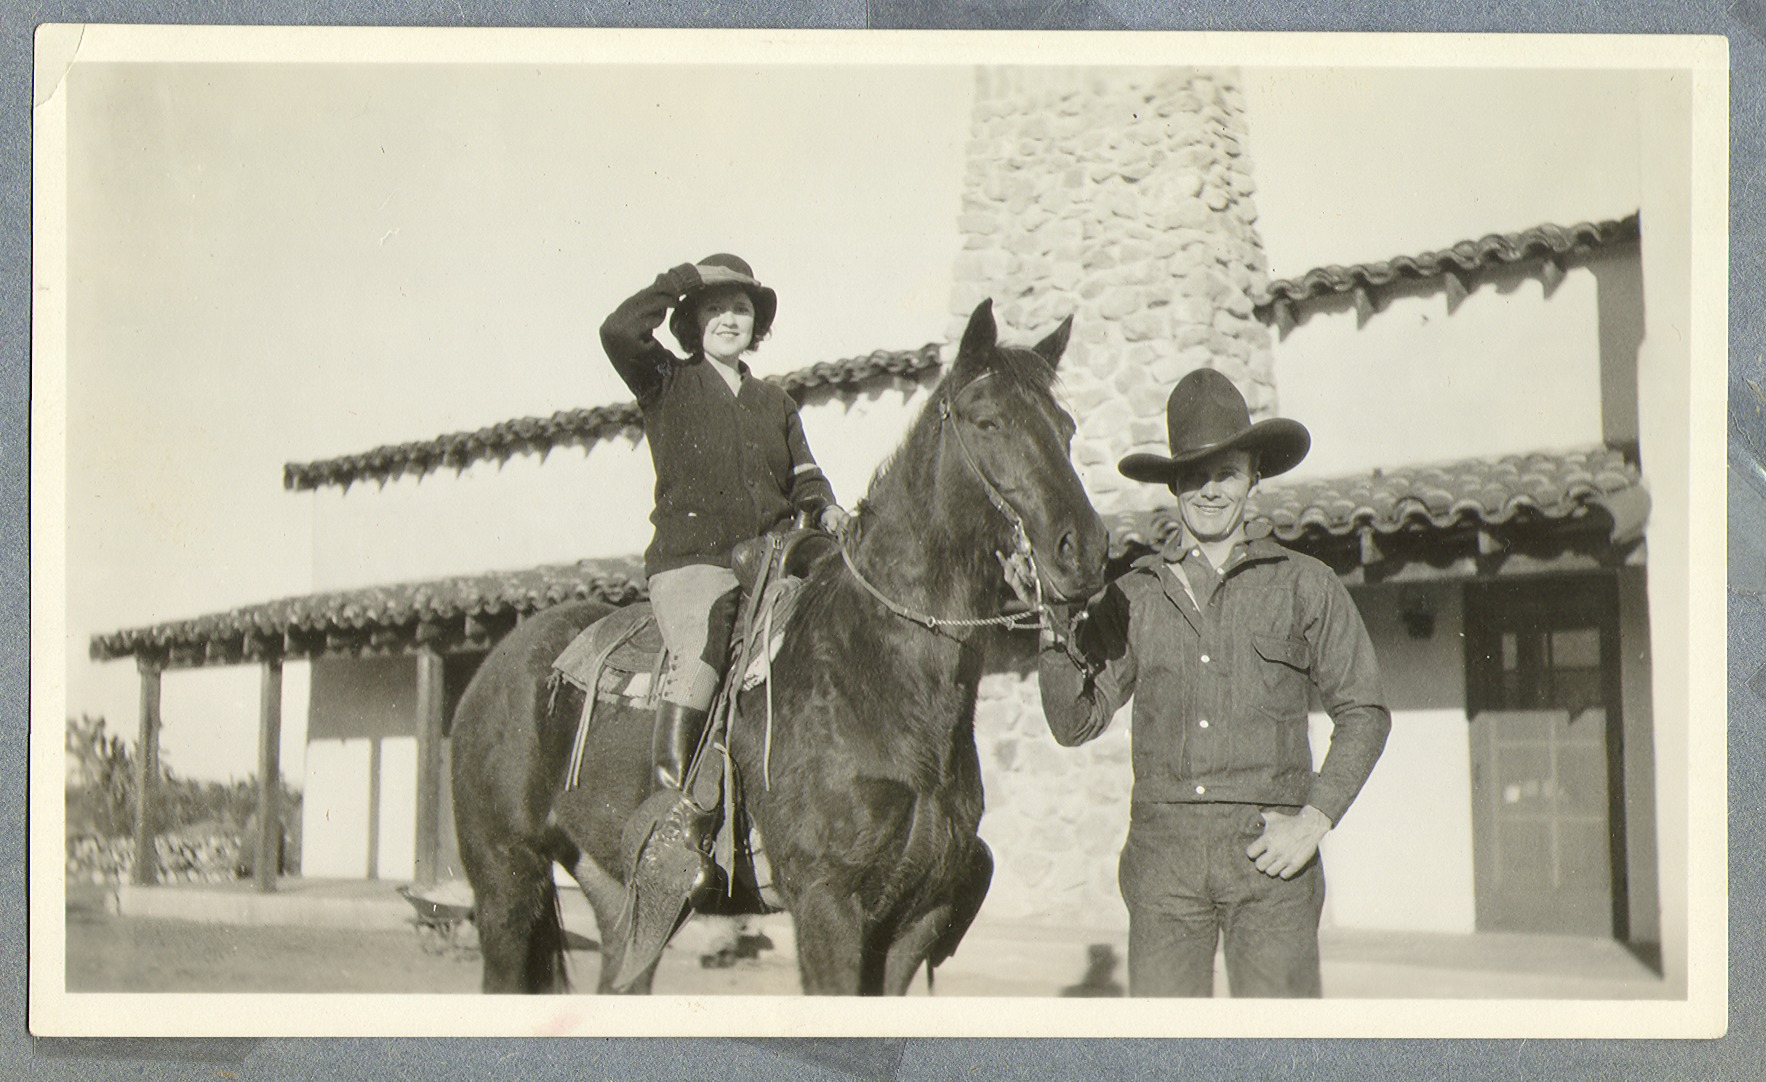 Marion Lewyn on horseback next to Rex Bell: photographic print